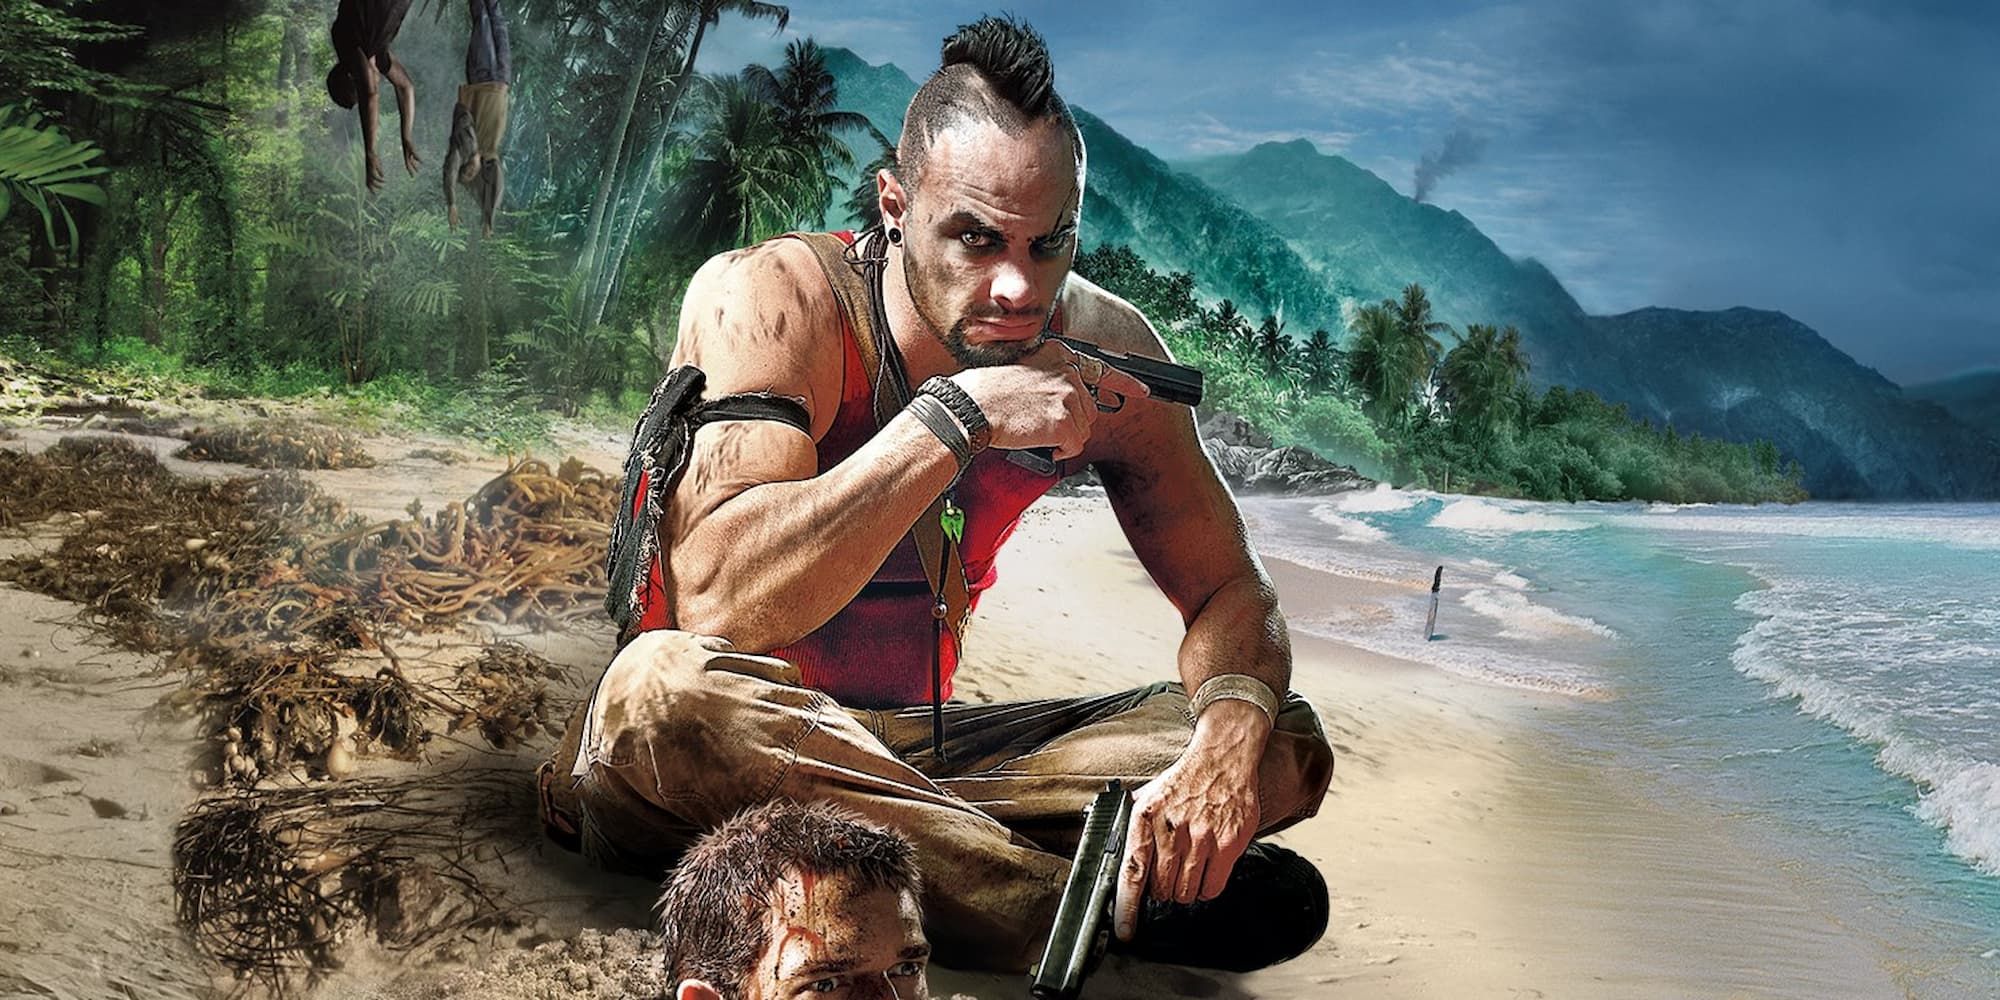 Vaas Montenegro sits on a beach with a head buried in the sand next to him as he holds two pistols.